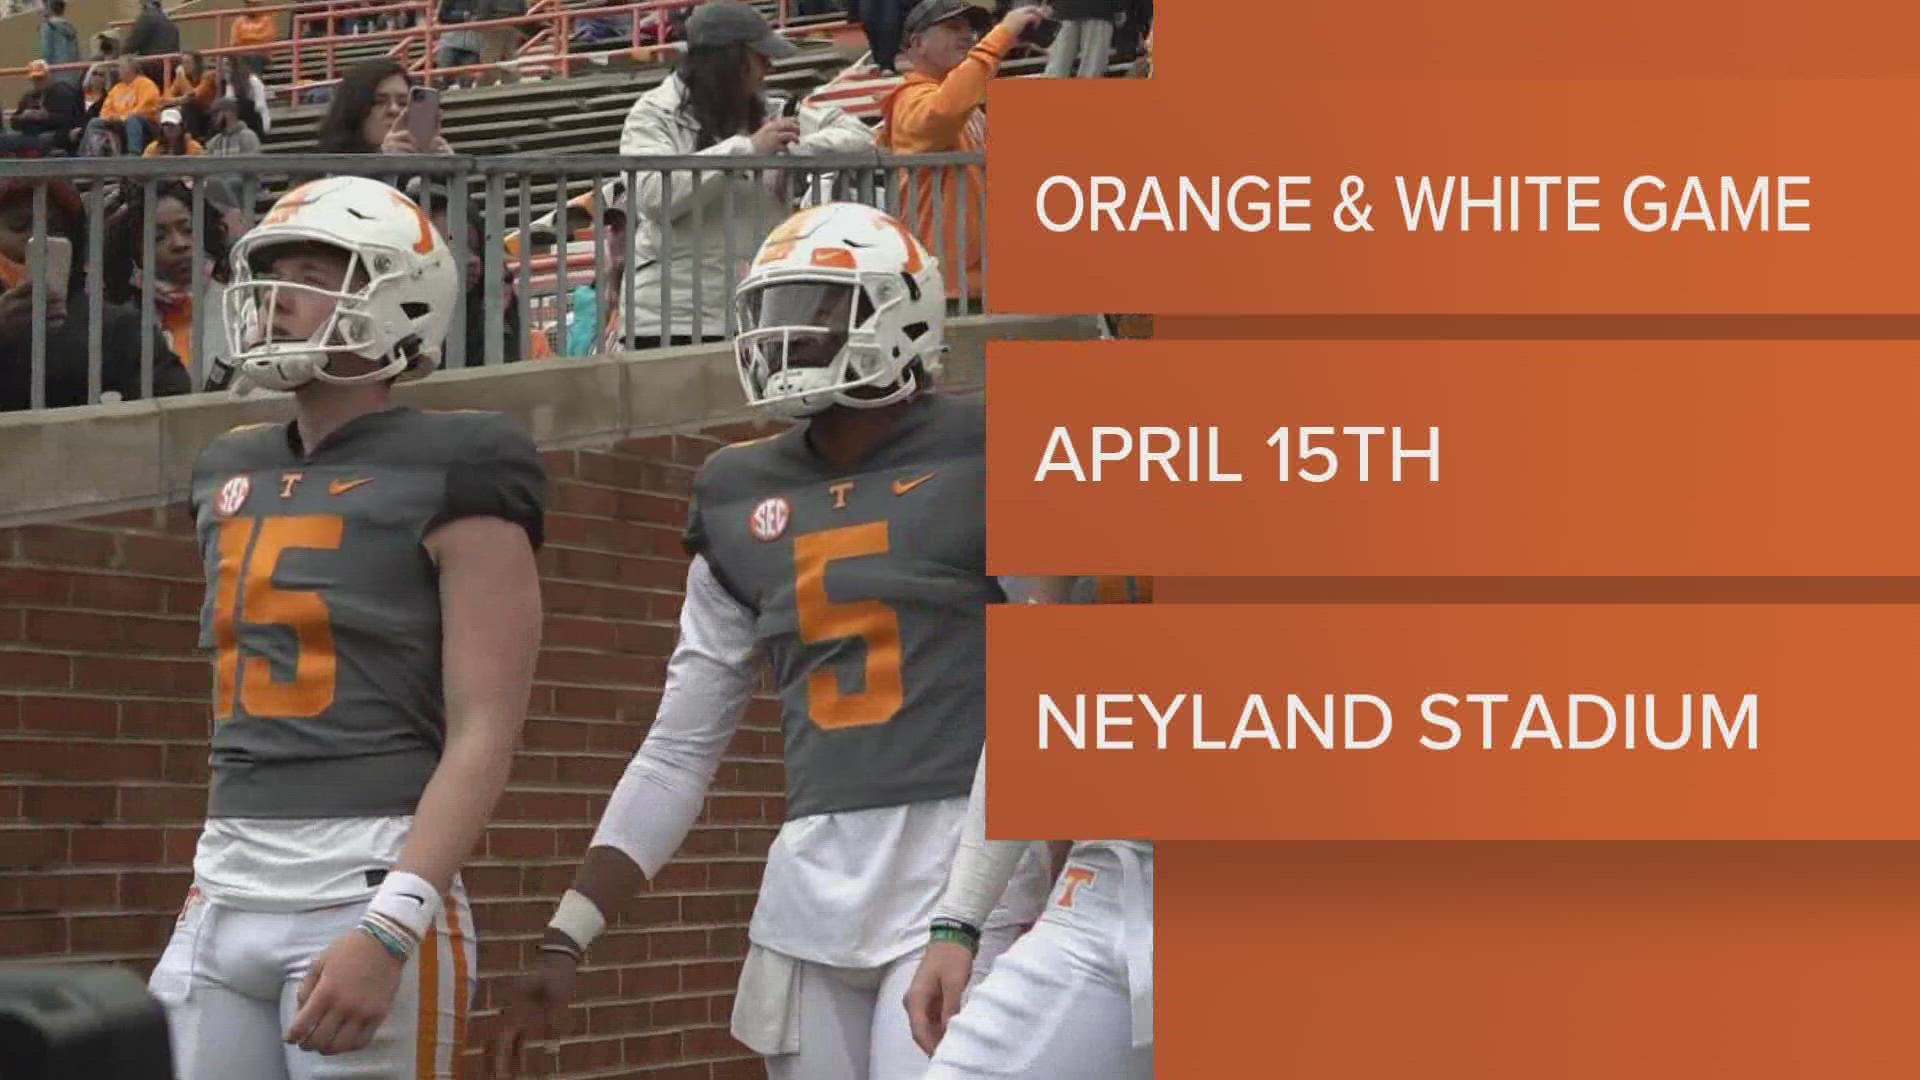 Vol Football announced on Twitter this year's Orange and White game is set for April 15.